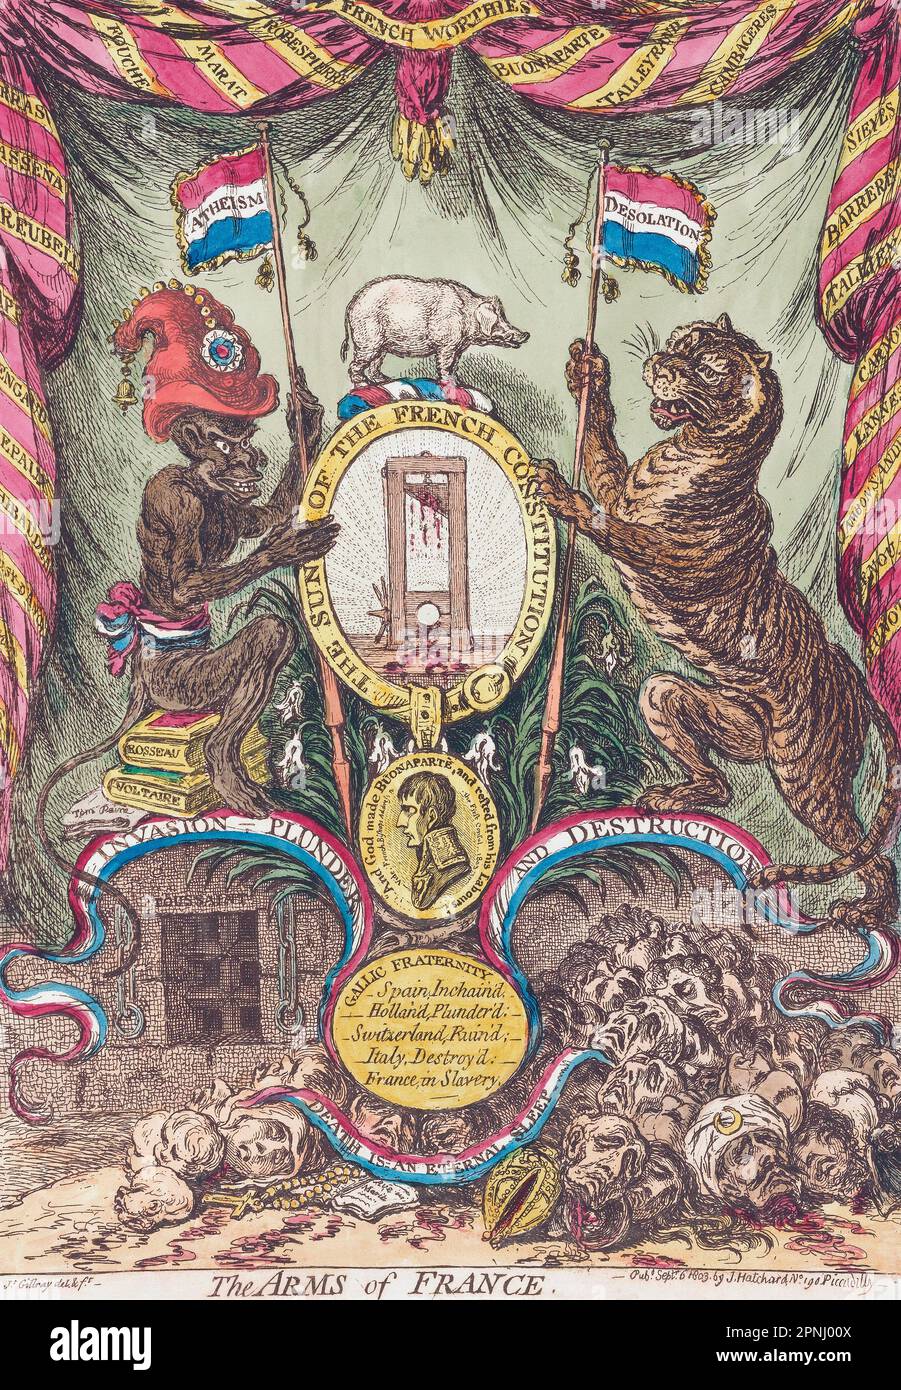 The Arms of France, a satirical comment on Napoleon's France, and the consequences of his ambitions and conquests. At the centre, a guillotine surrounded by the words The Sun of the French Constitution.  After an 1803 work by James Gillray. Stock Photo